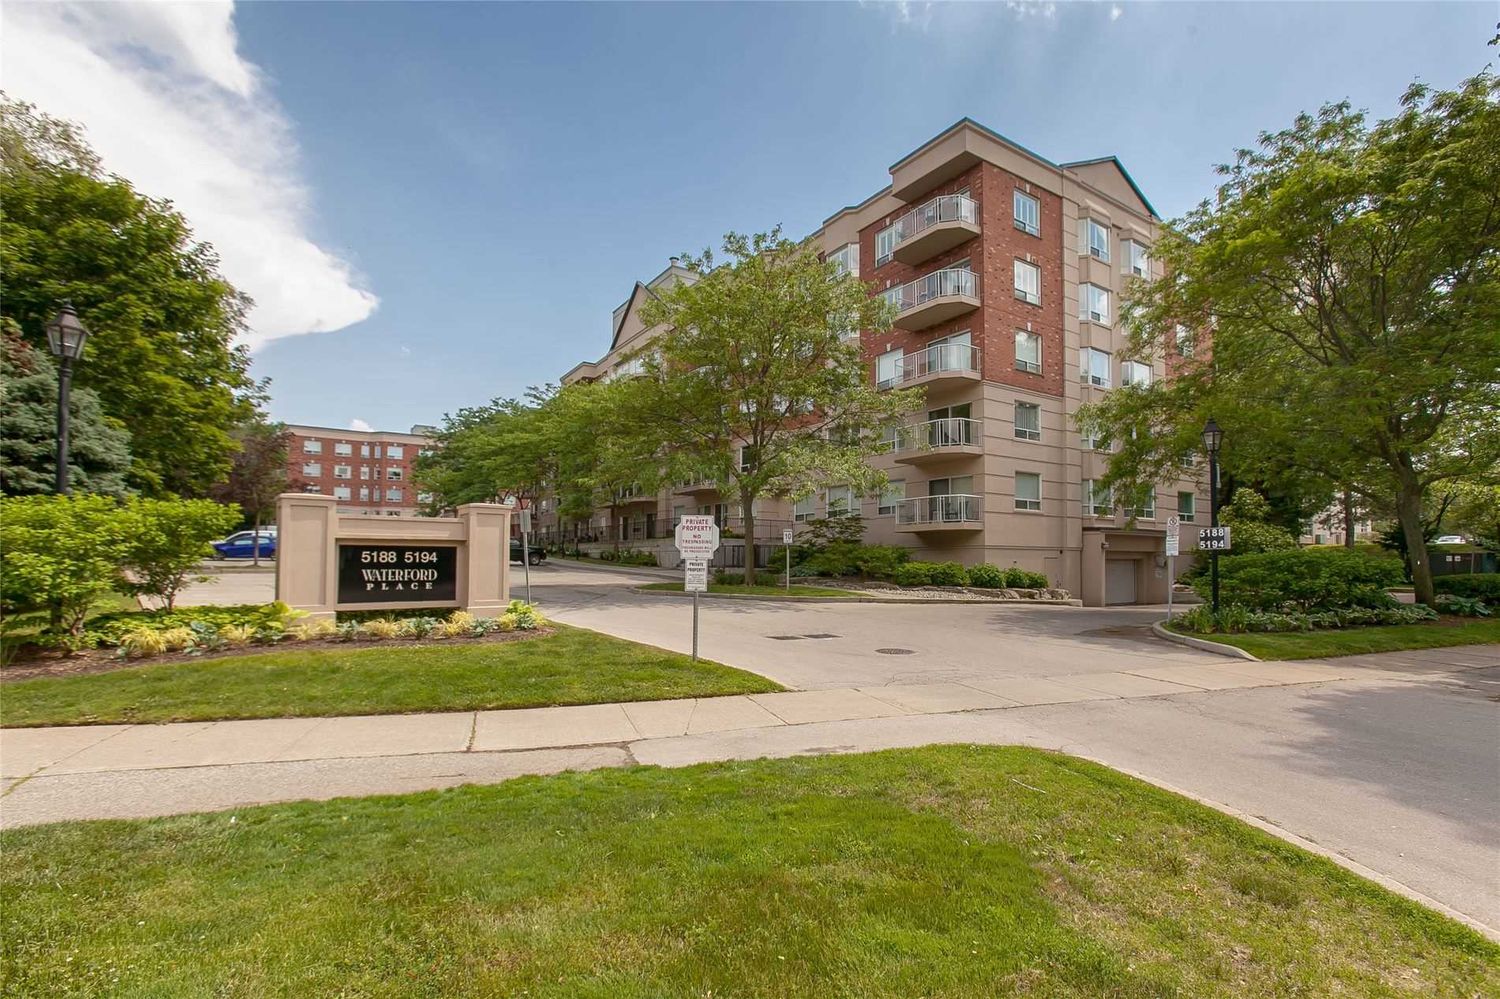 5188 Lakeshore Road. Waterford Place Condos is located in  Burlington, Toronto - image #1 of 2